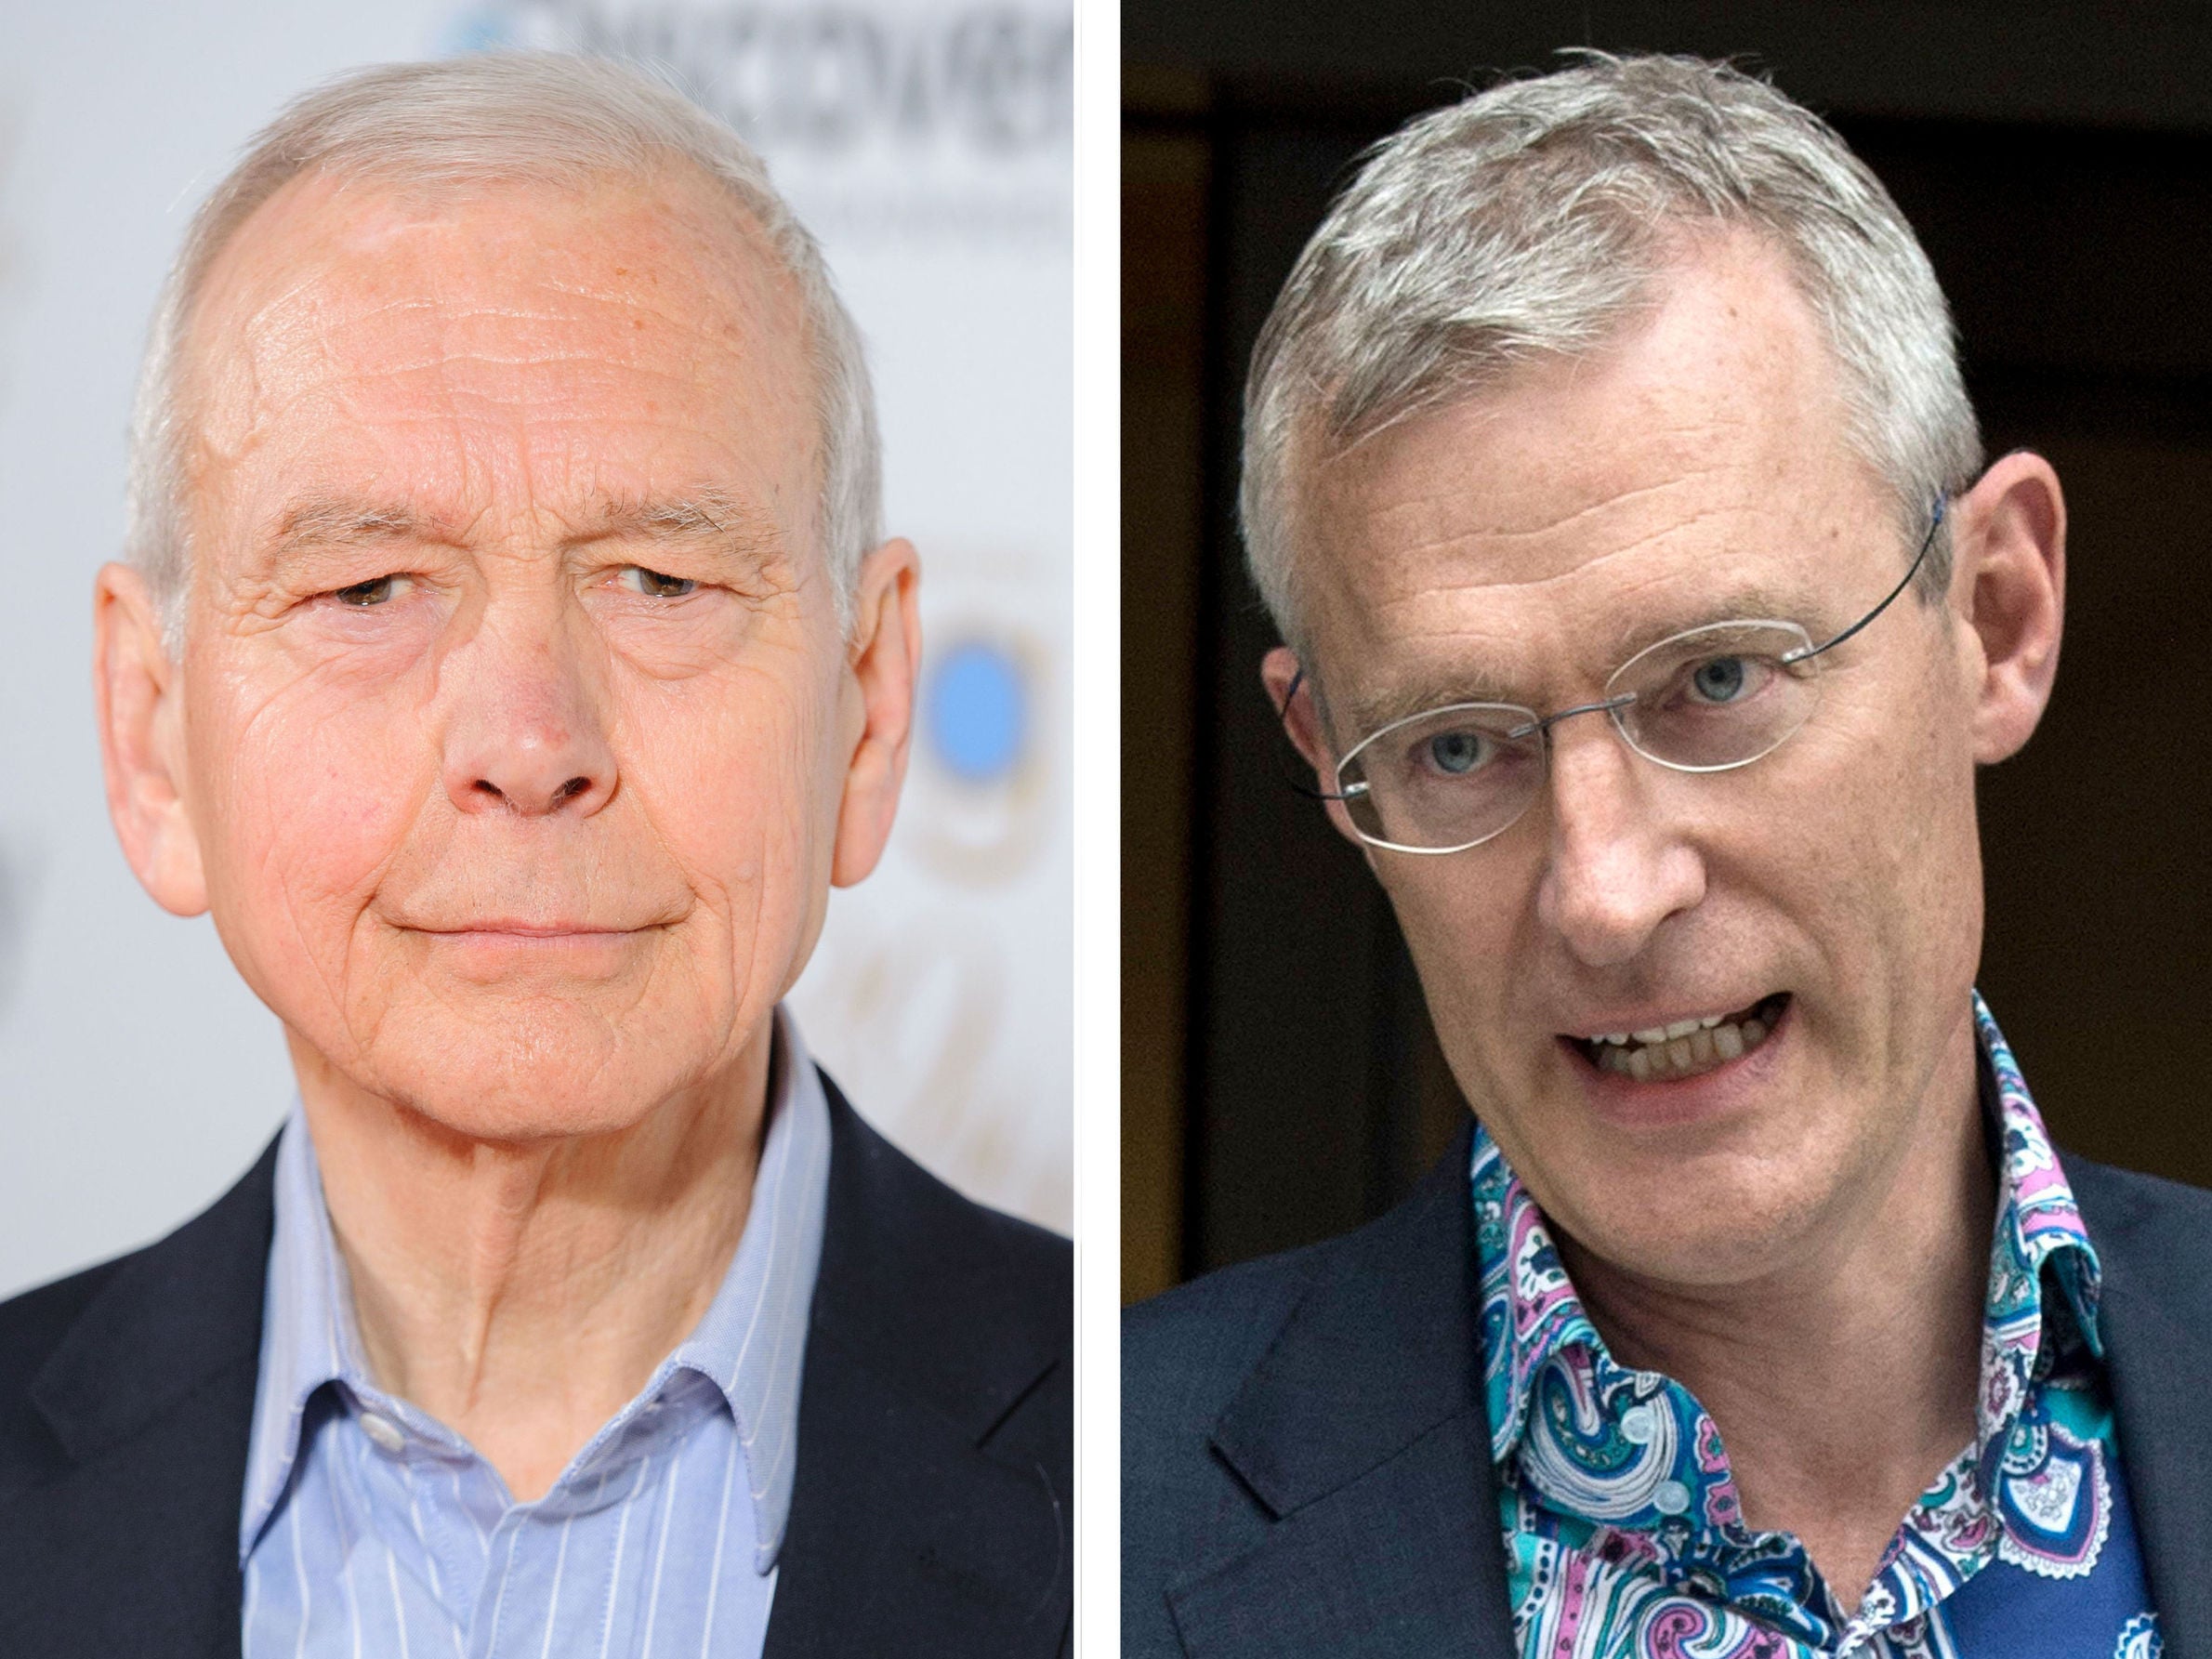 Six top-earning BBC journalists agree to salary cuts in move towards equal pay